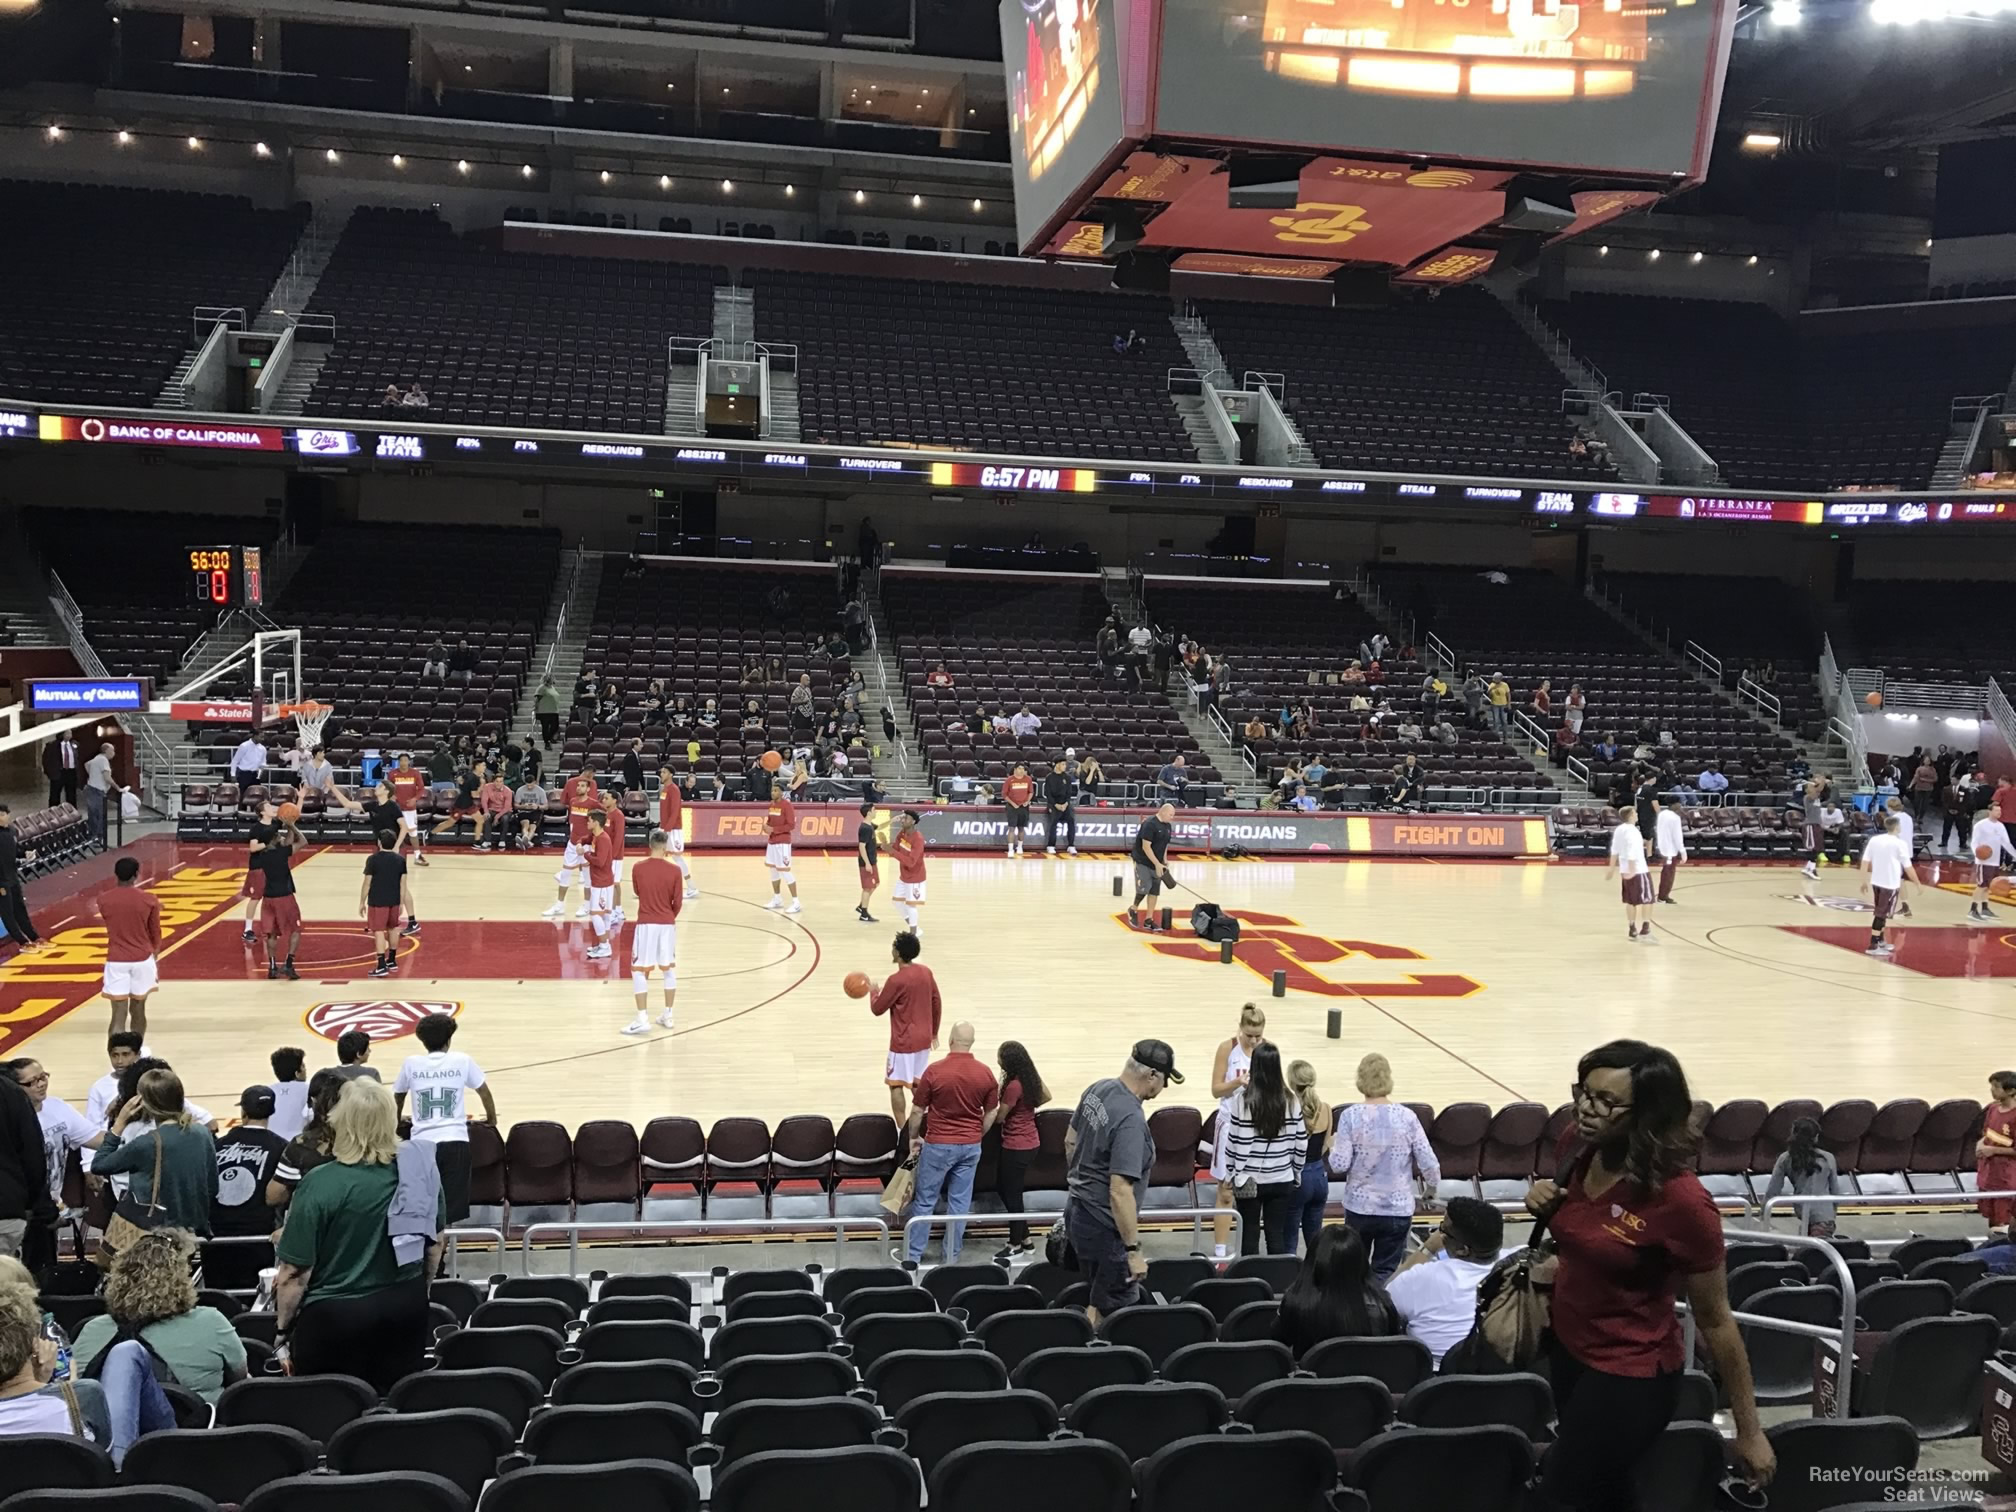 section 103, row 10 seat view  - galen center